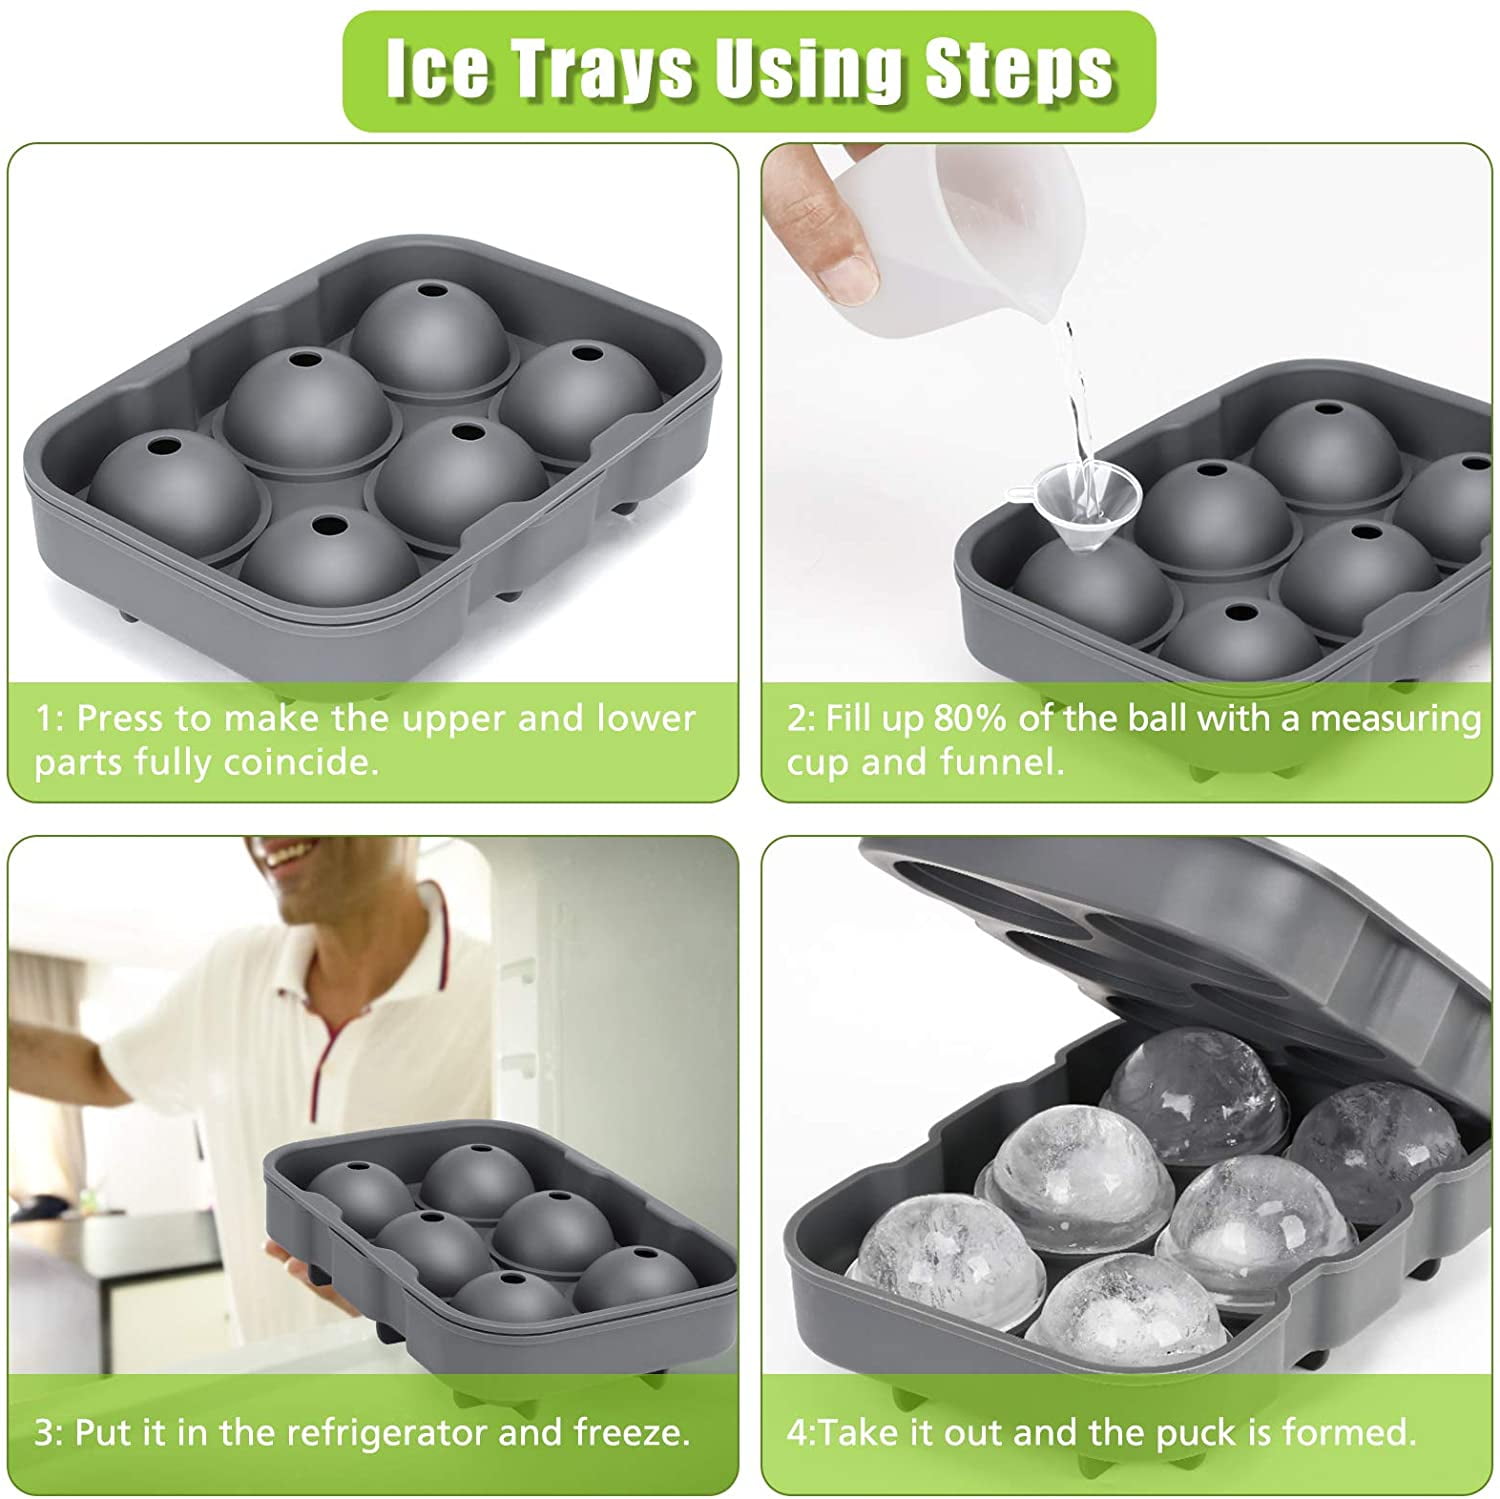 Up To 80% Off on Large Silicone Ice Mold Maker